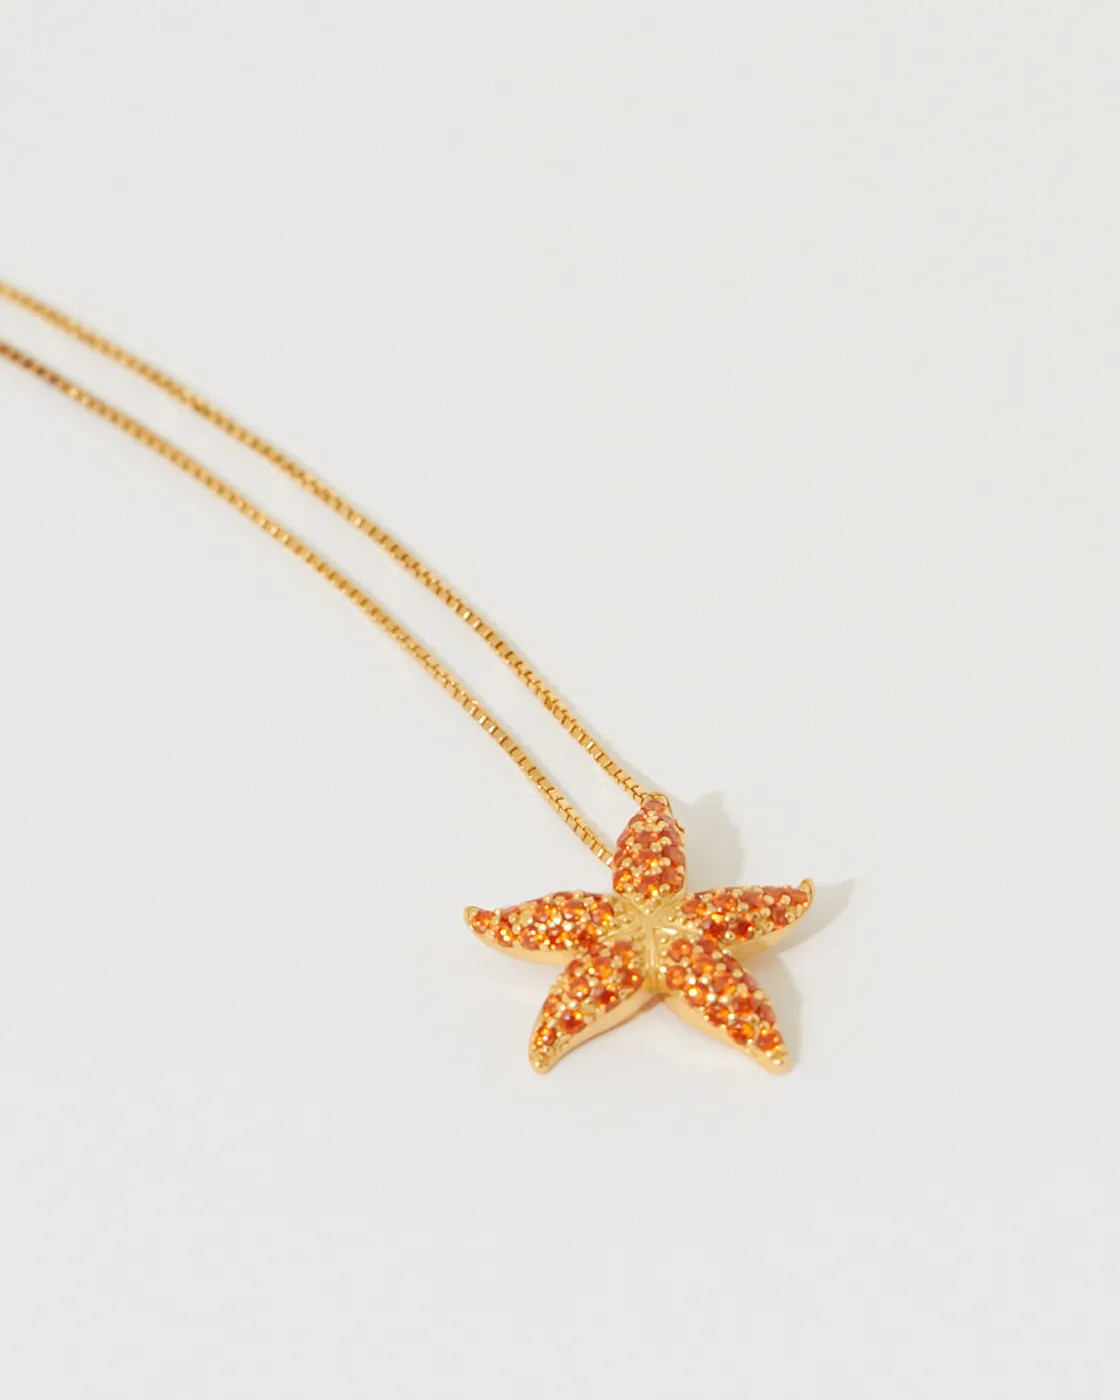 Krill Sterling Silver Necklace with Starfish Pendant